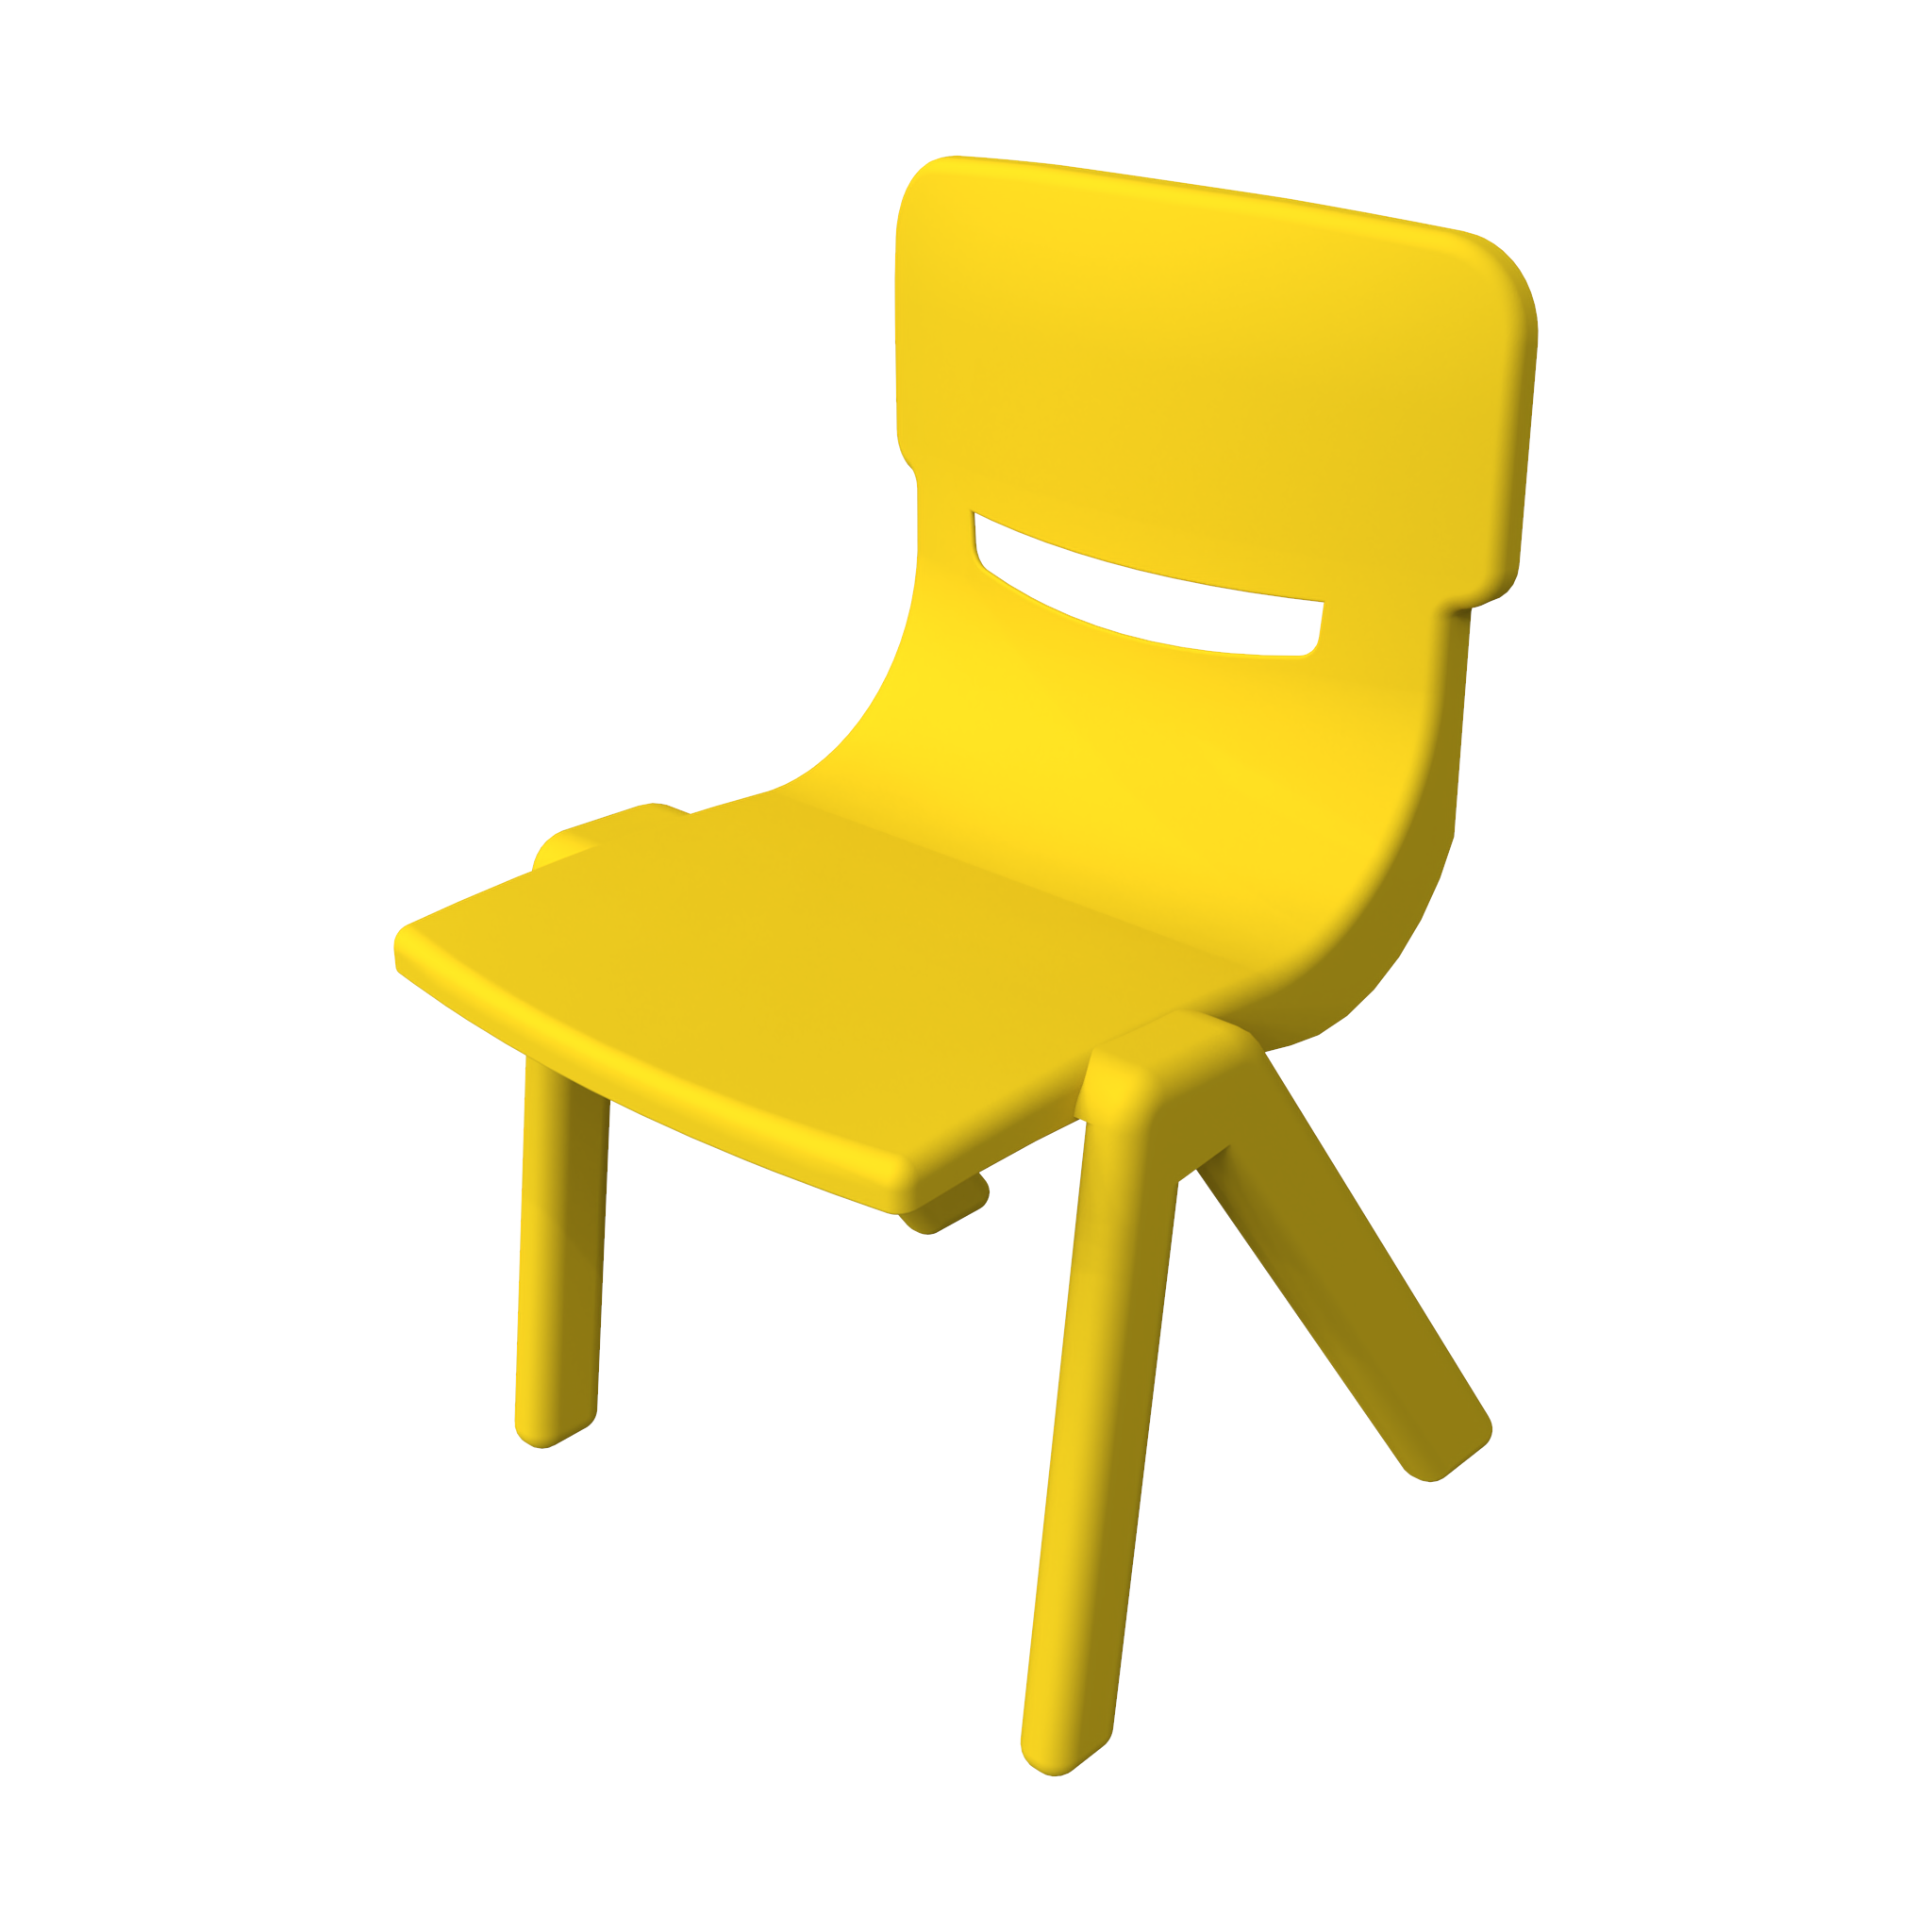 This image shows an Kids furniture Fun chair yellow